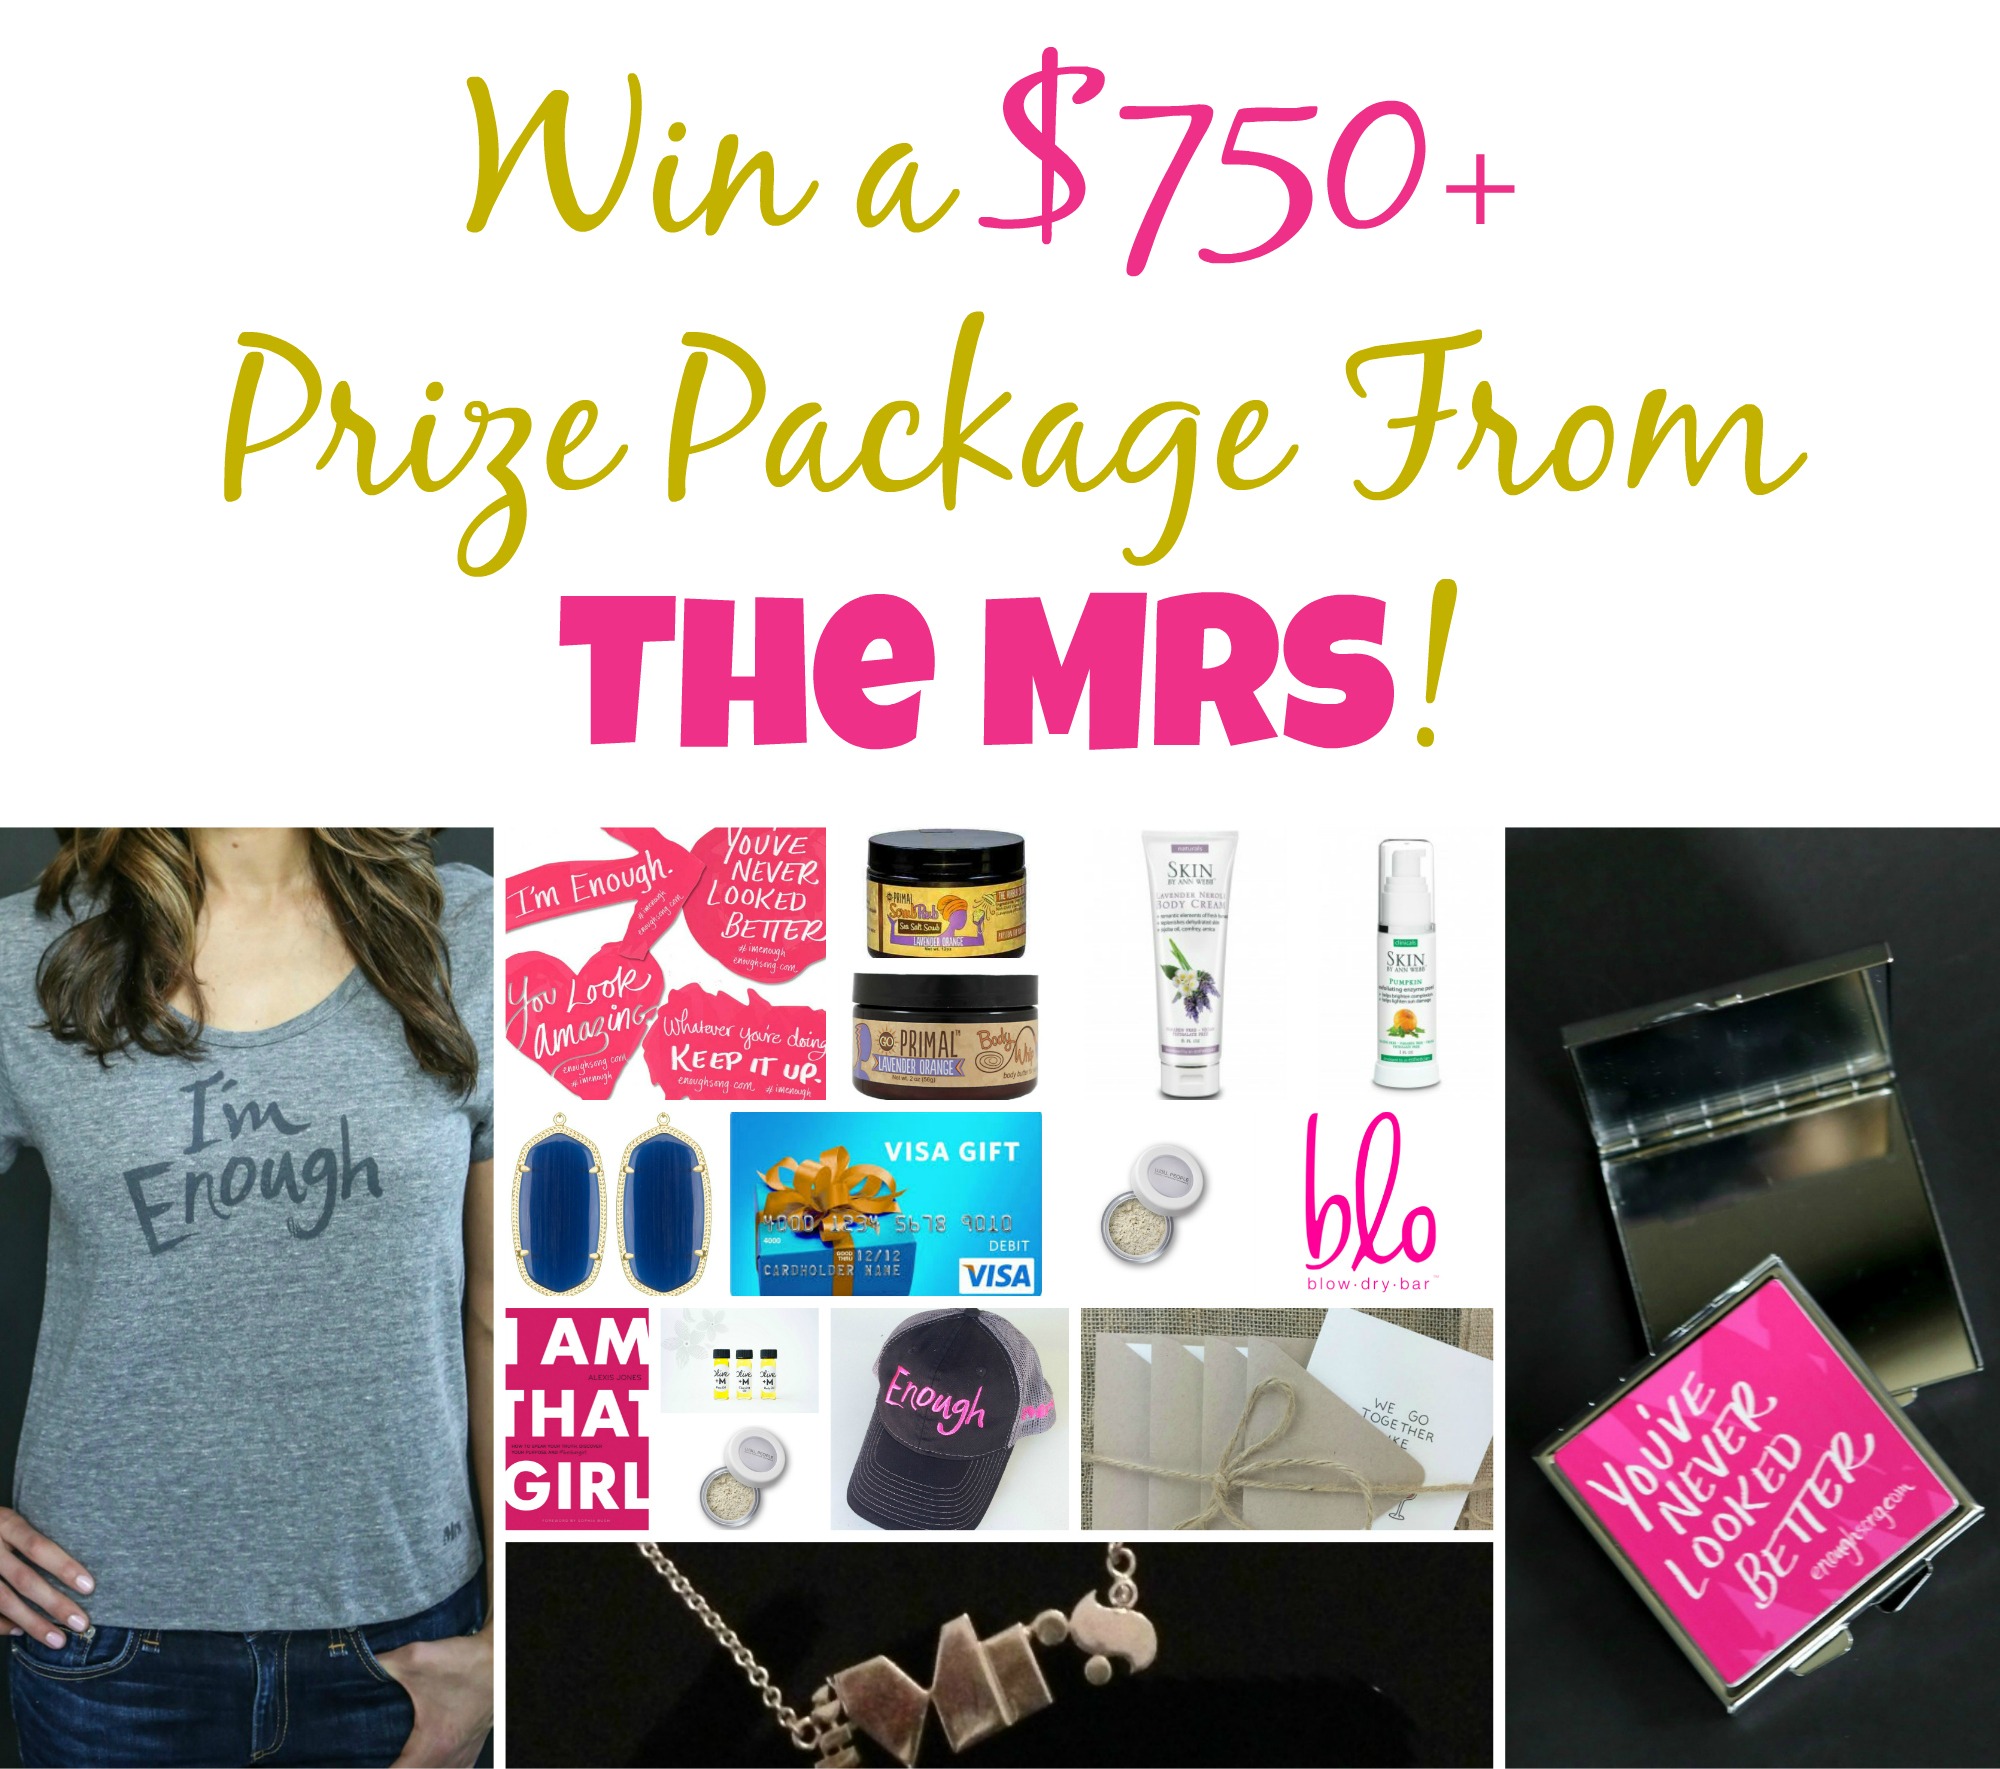 Win a $750 prize package From The Mrs. Band!